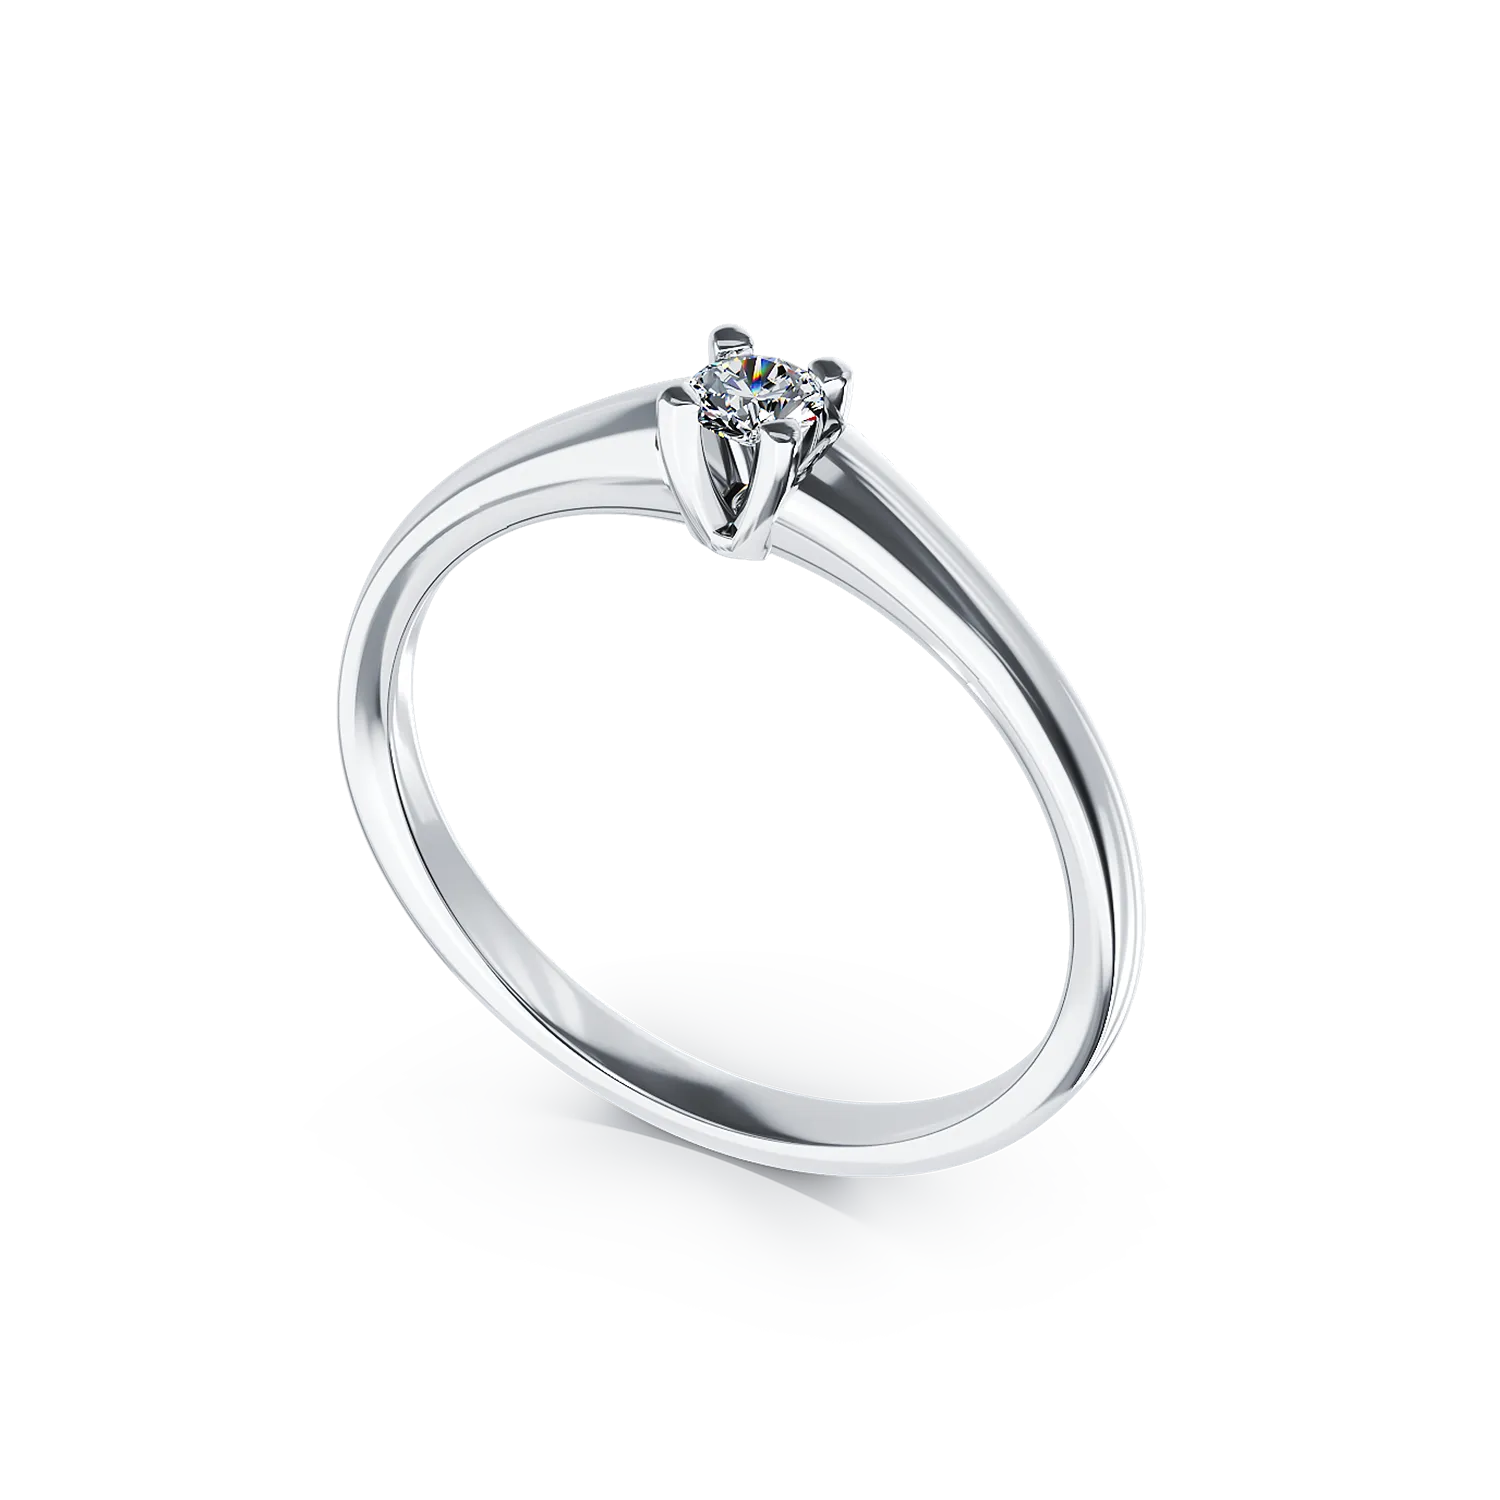 18K white gold engagement ring with a 0.1ct solitaire diamond